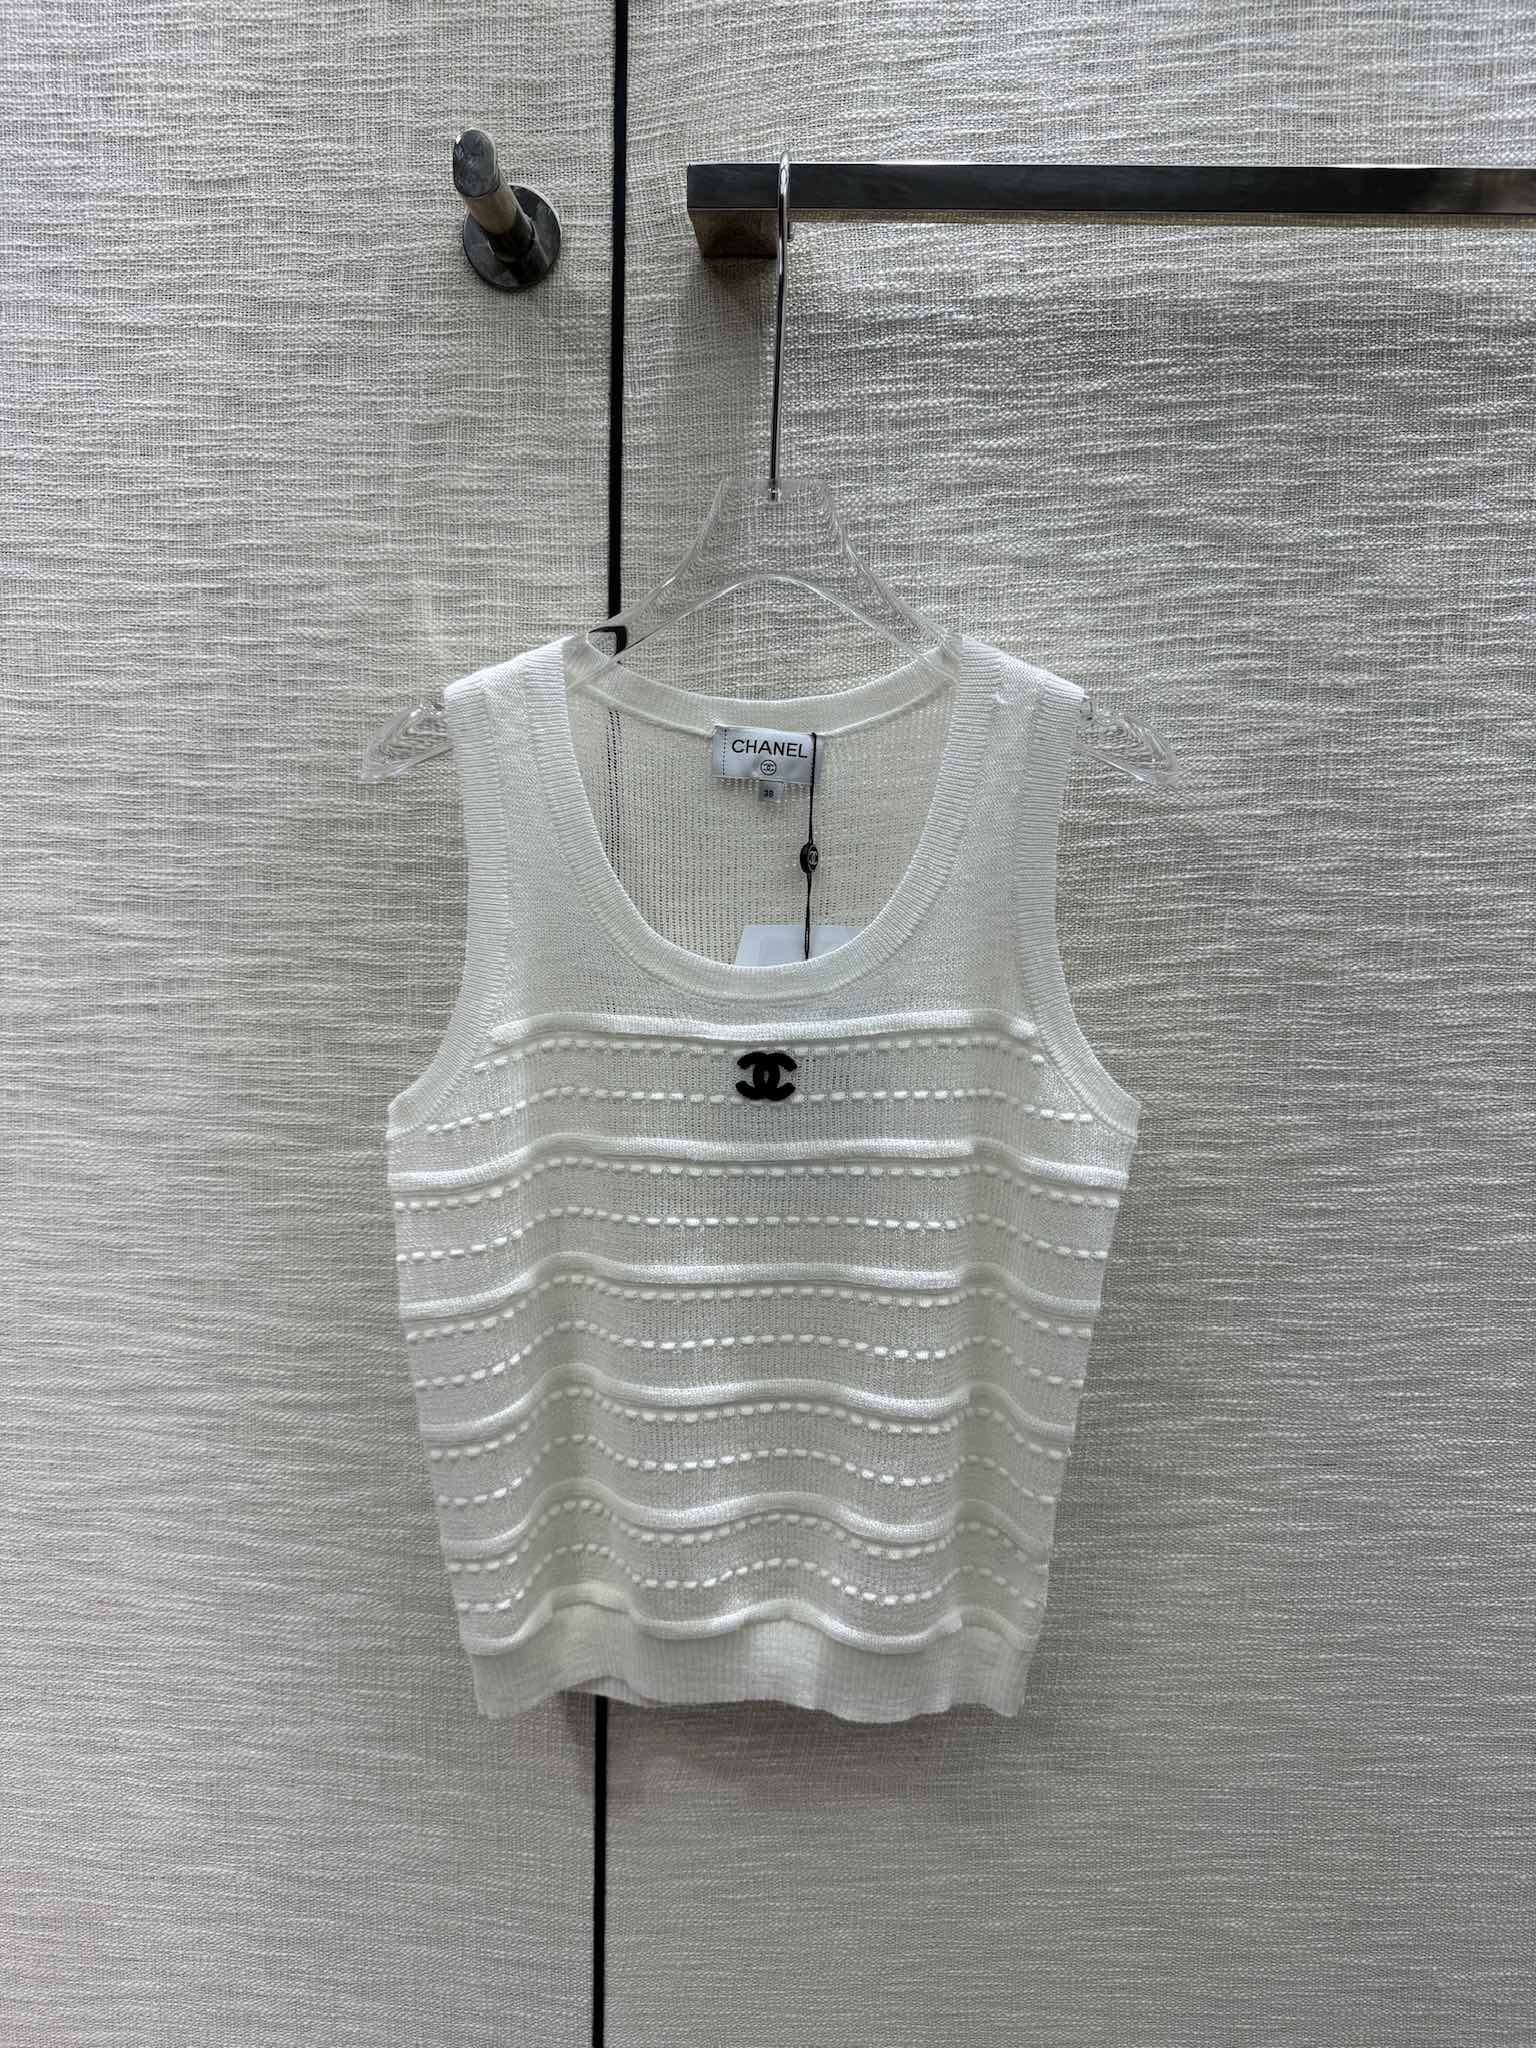 Fake
 Chanel Clothing Tank Tops&Camis Openwork Knitting Spring/Summer Collection